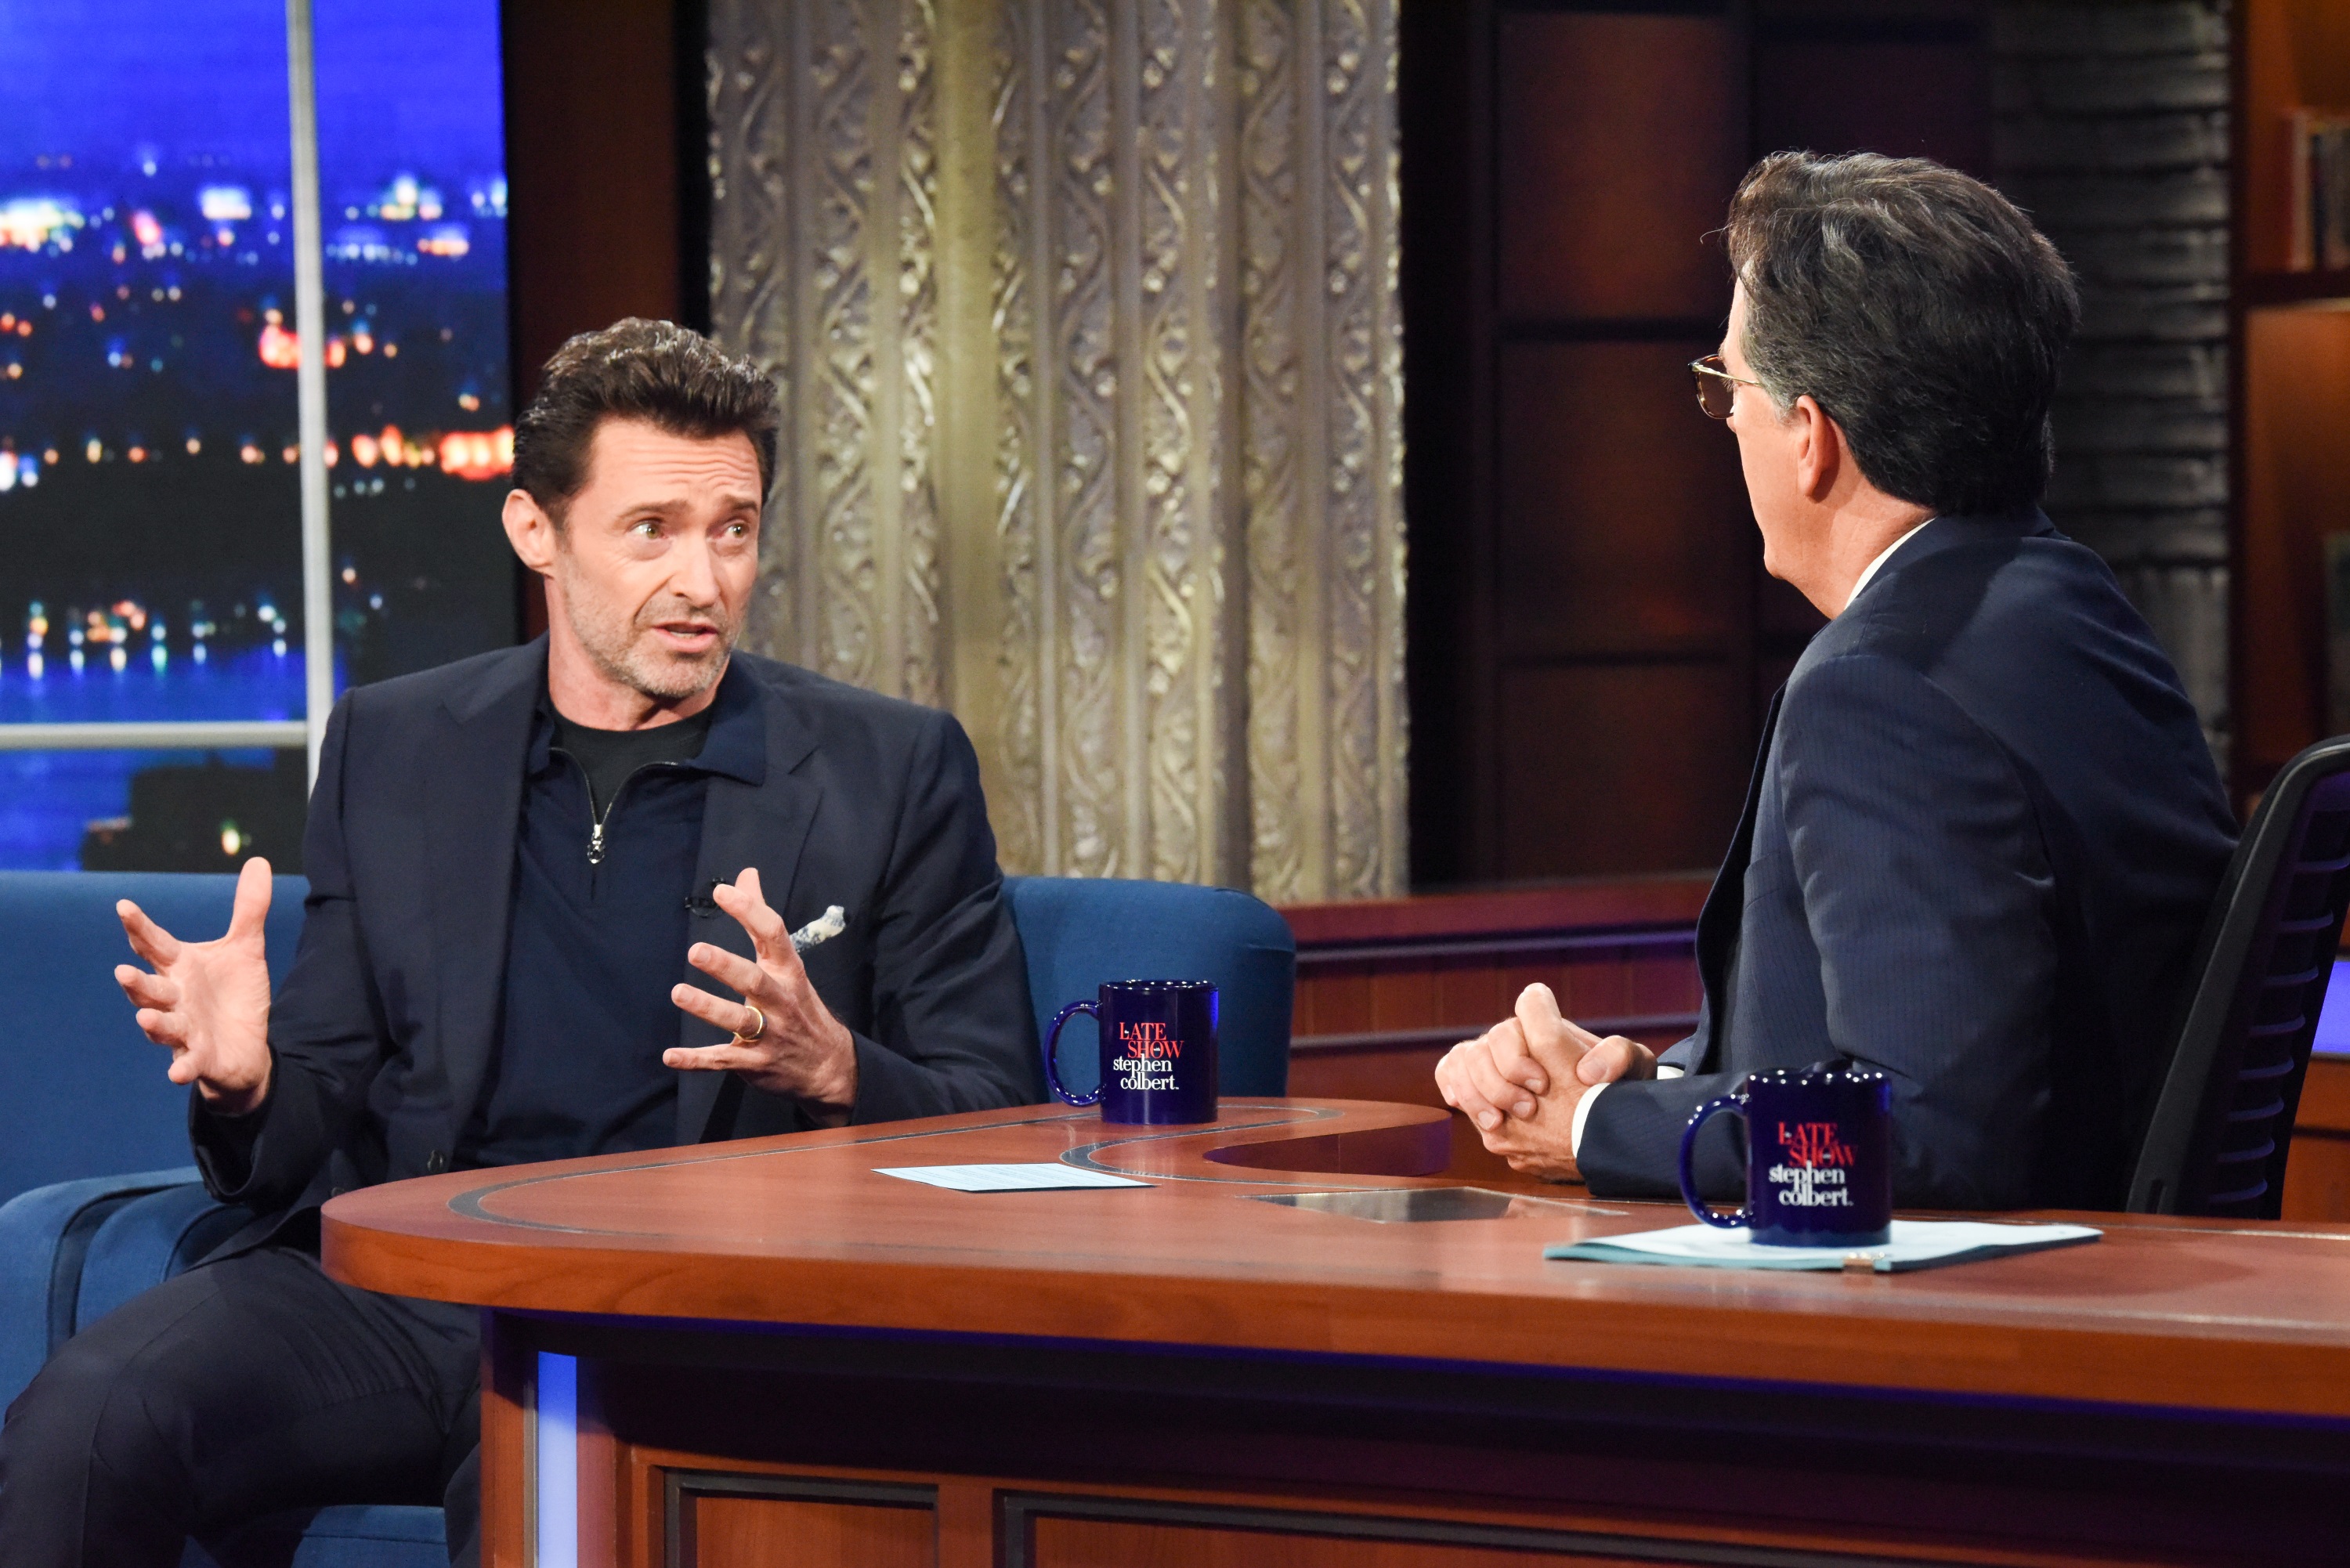 Hugh Jackman talks to Stephen Colbert about his new movie Reminscence coming to HBO in August